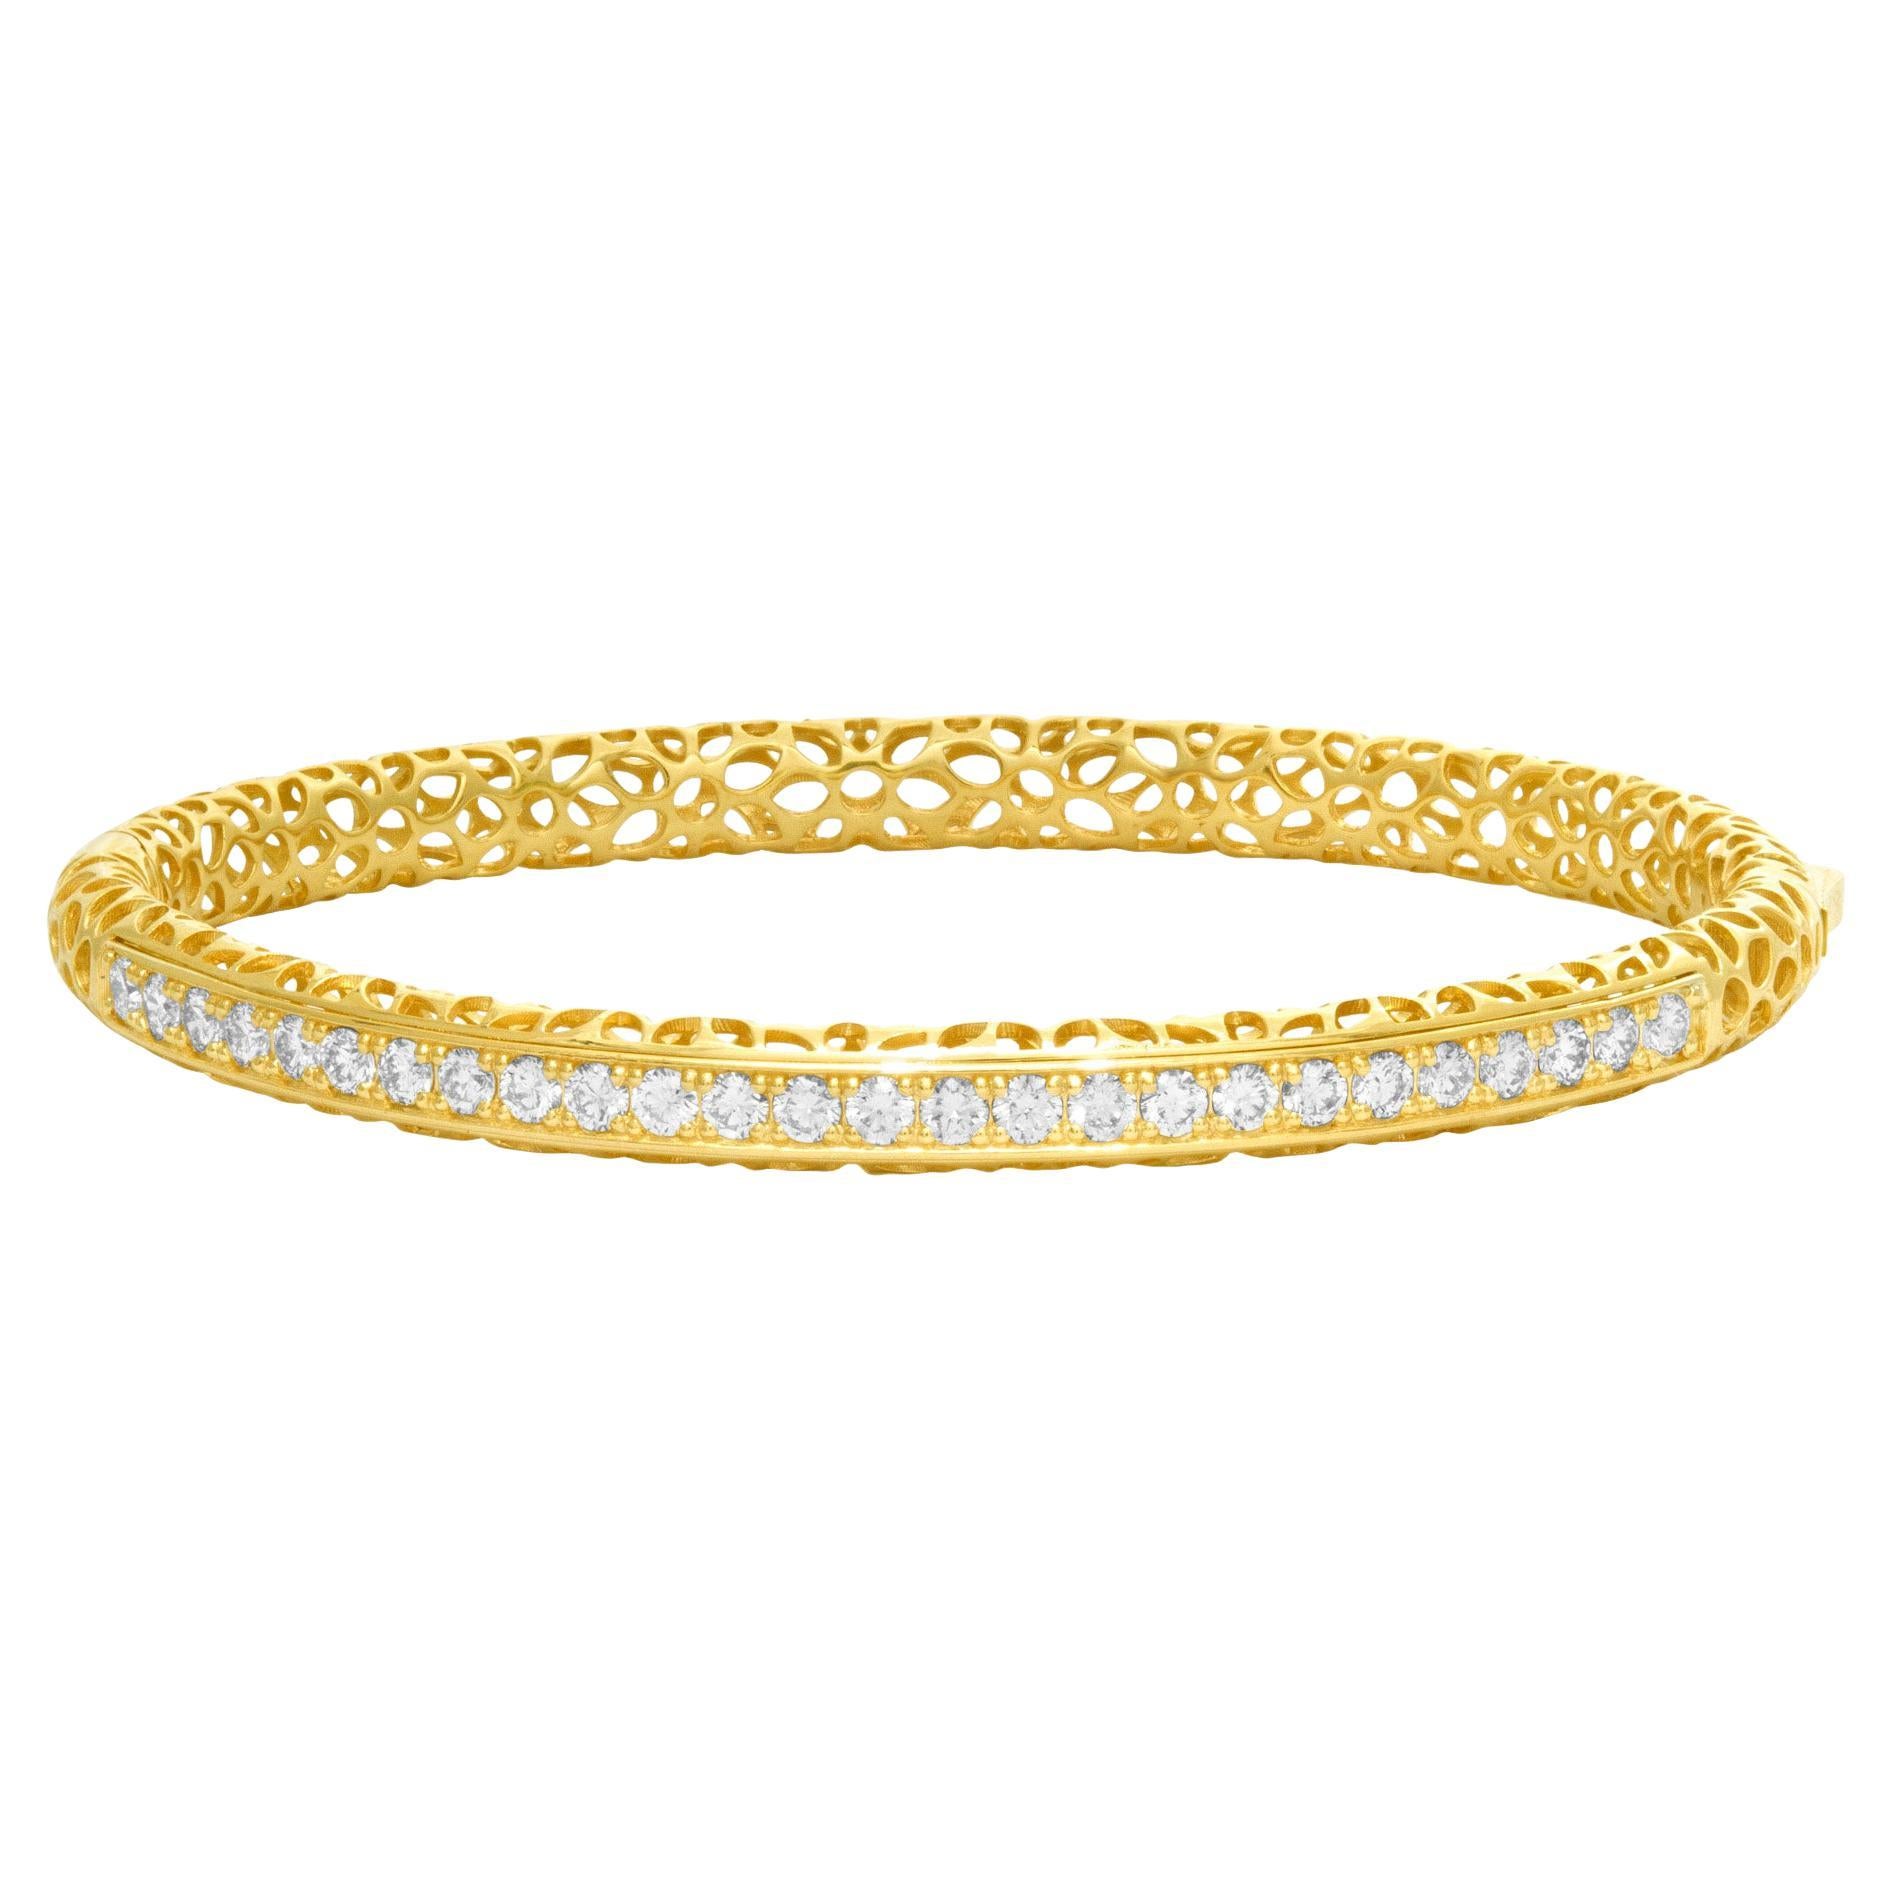 Diamond Bangle with 1.47 Cts in Diamonds 'G-H Color, VS Clarity' Set in 18k Gold For Sale